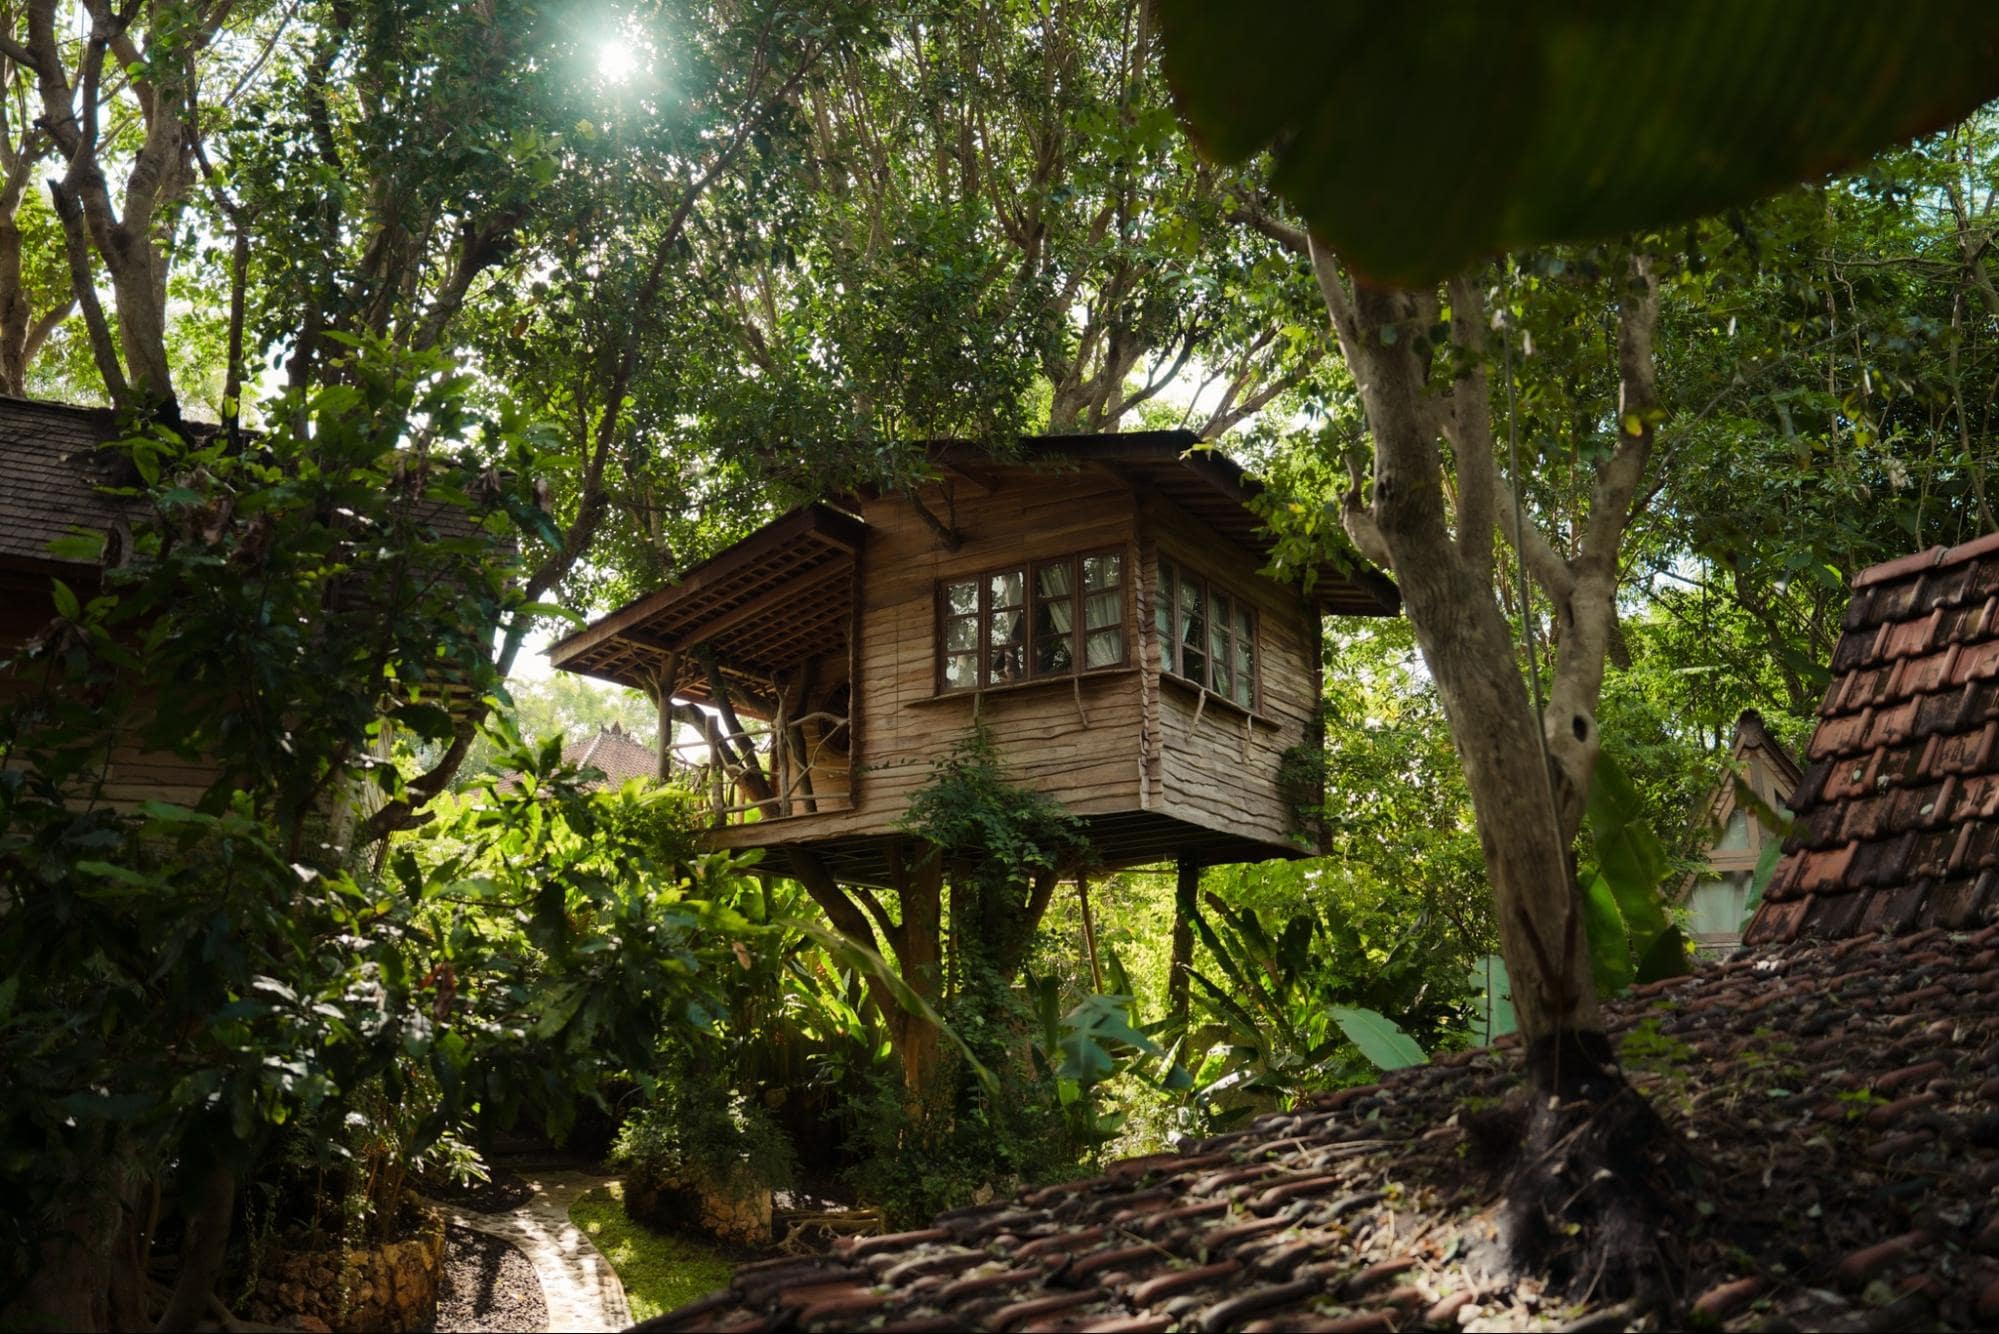 Unique resorts near Singapore - Roots Tree House Bali Indonesia